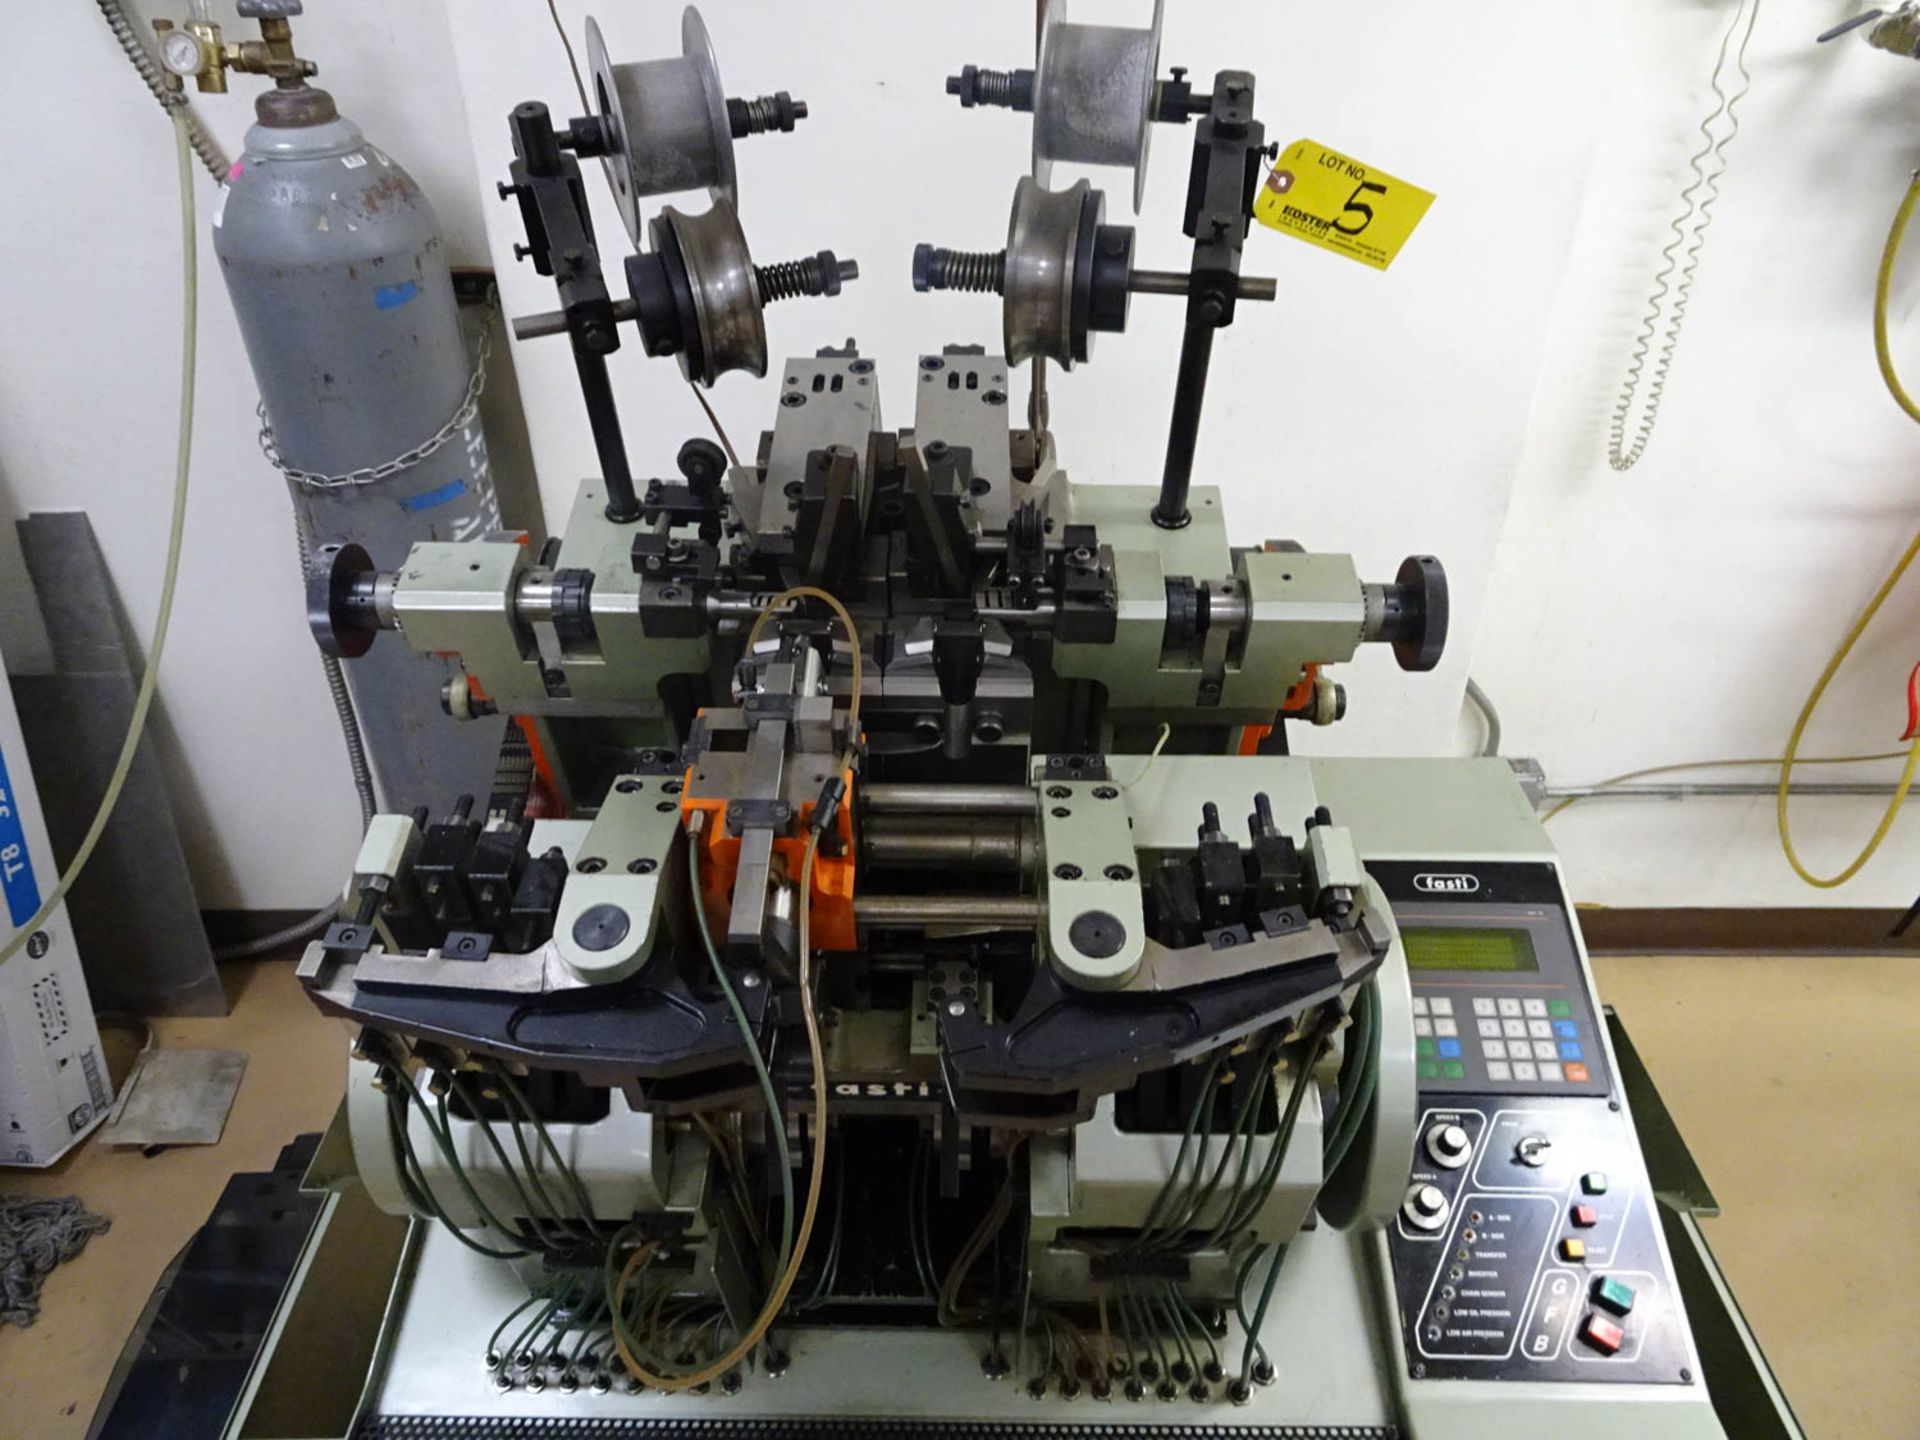 FASTI MDL. GFB (ITALY) (CE) FIGARO (LONG & SHORT LINKS) CHAIN MAKING MACHINE, ELECTRONIC, BIG - Image 3 of 8